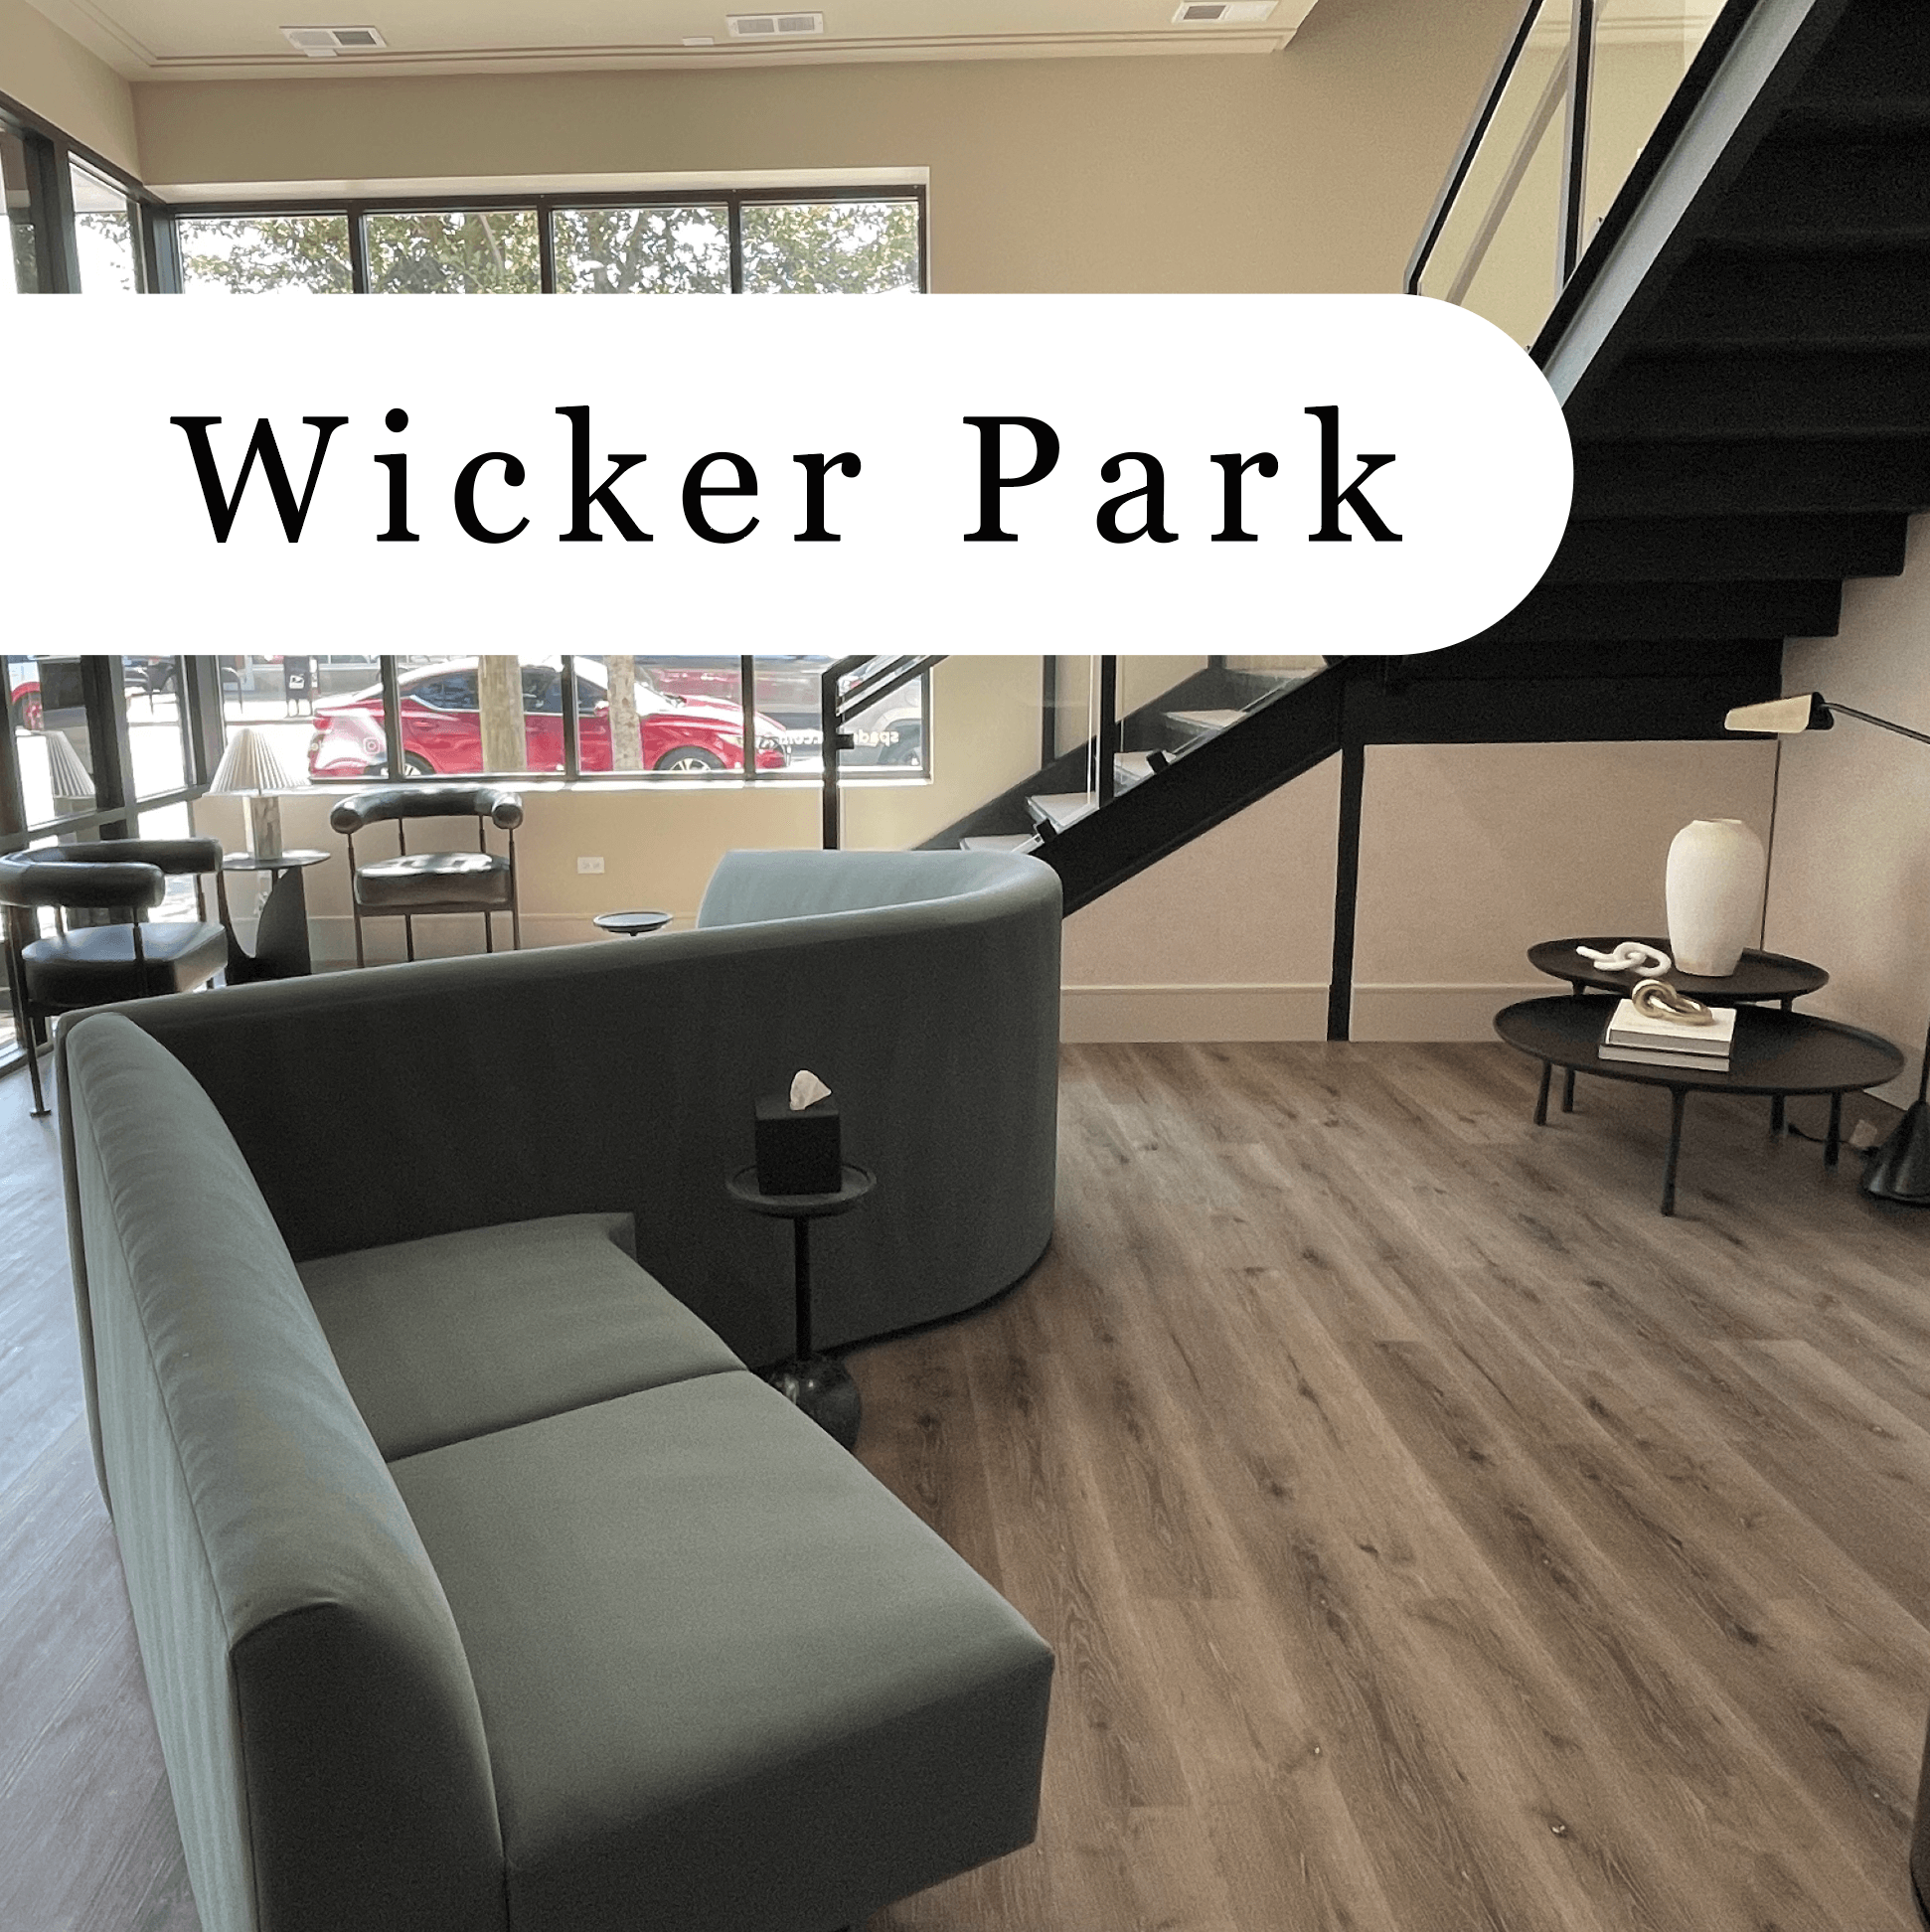 Wicker Park Location Image of Waiting Room